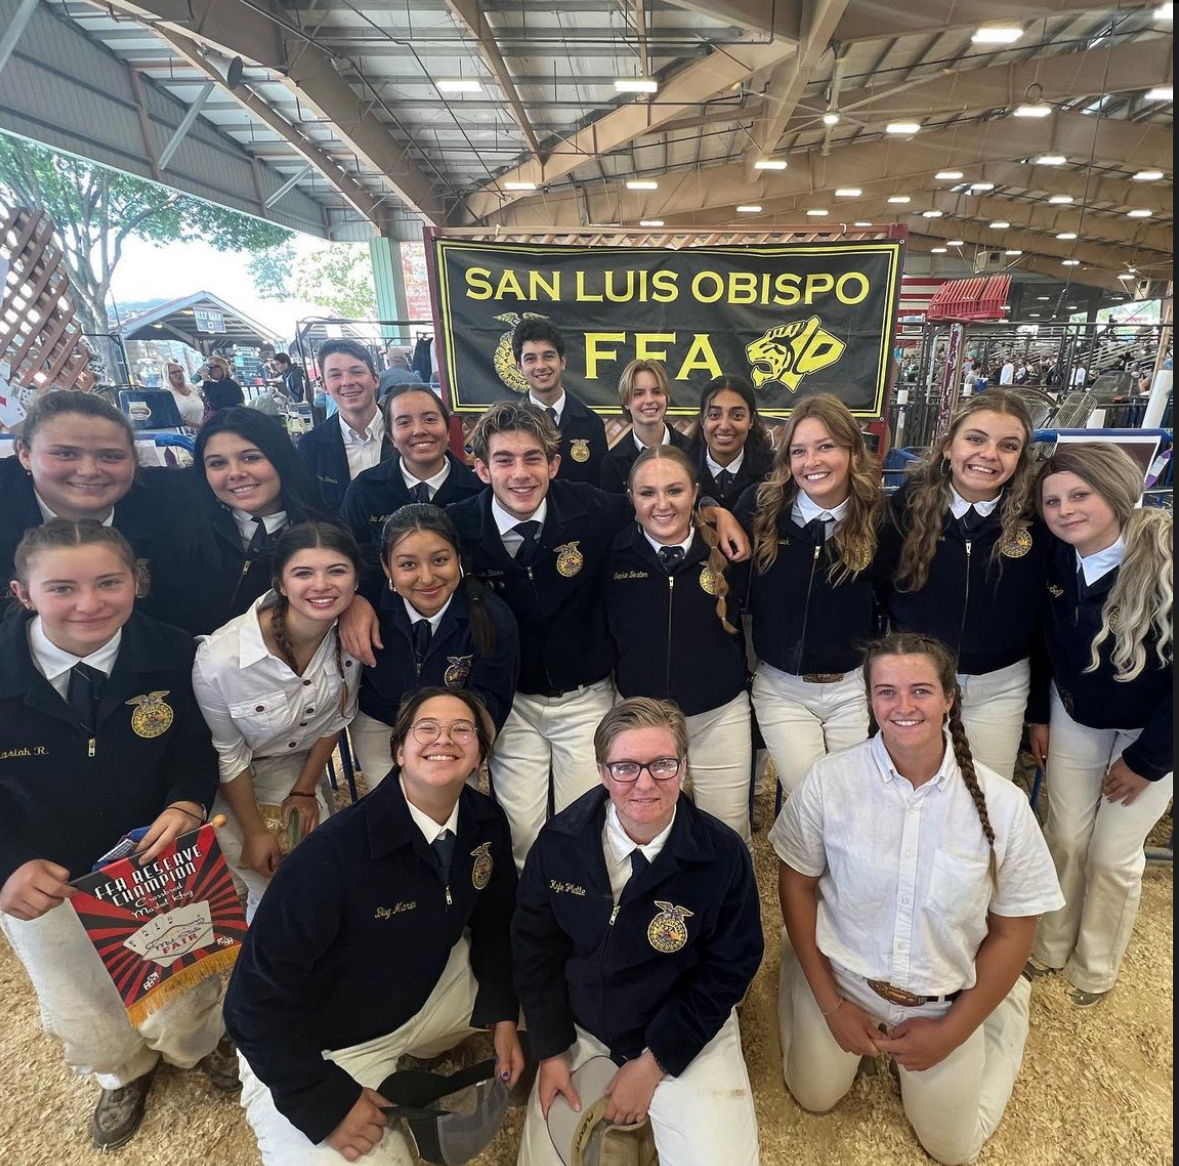 Behind the Scenes: SLOHS Showing Livestock at the Mid State Fair